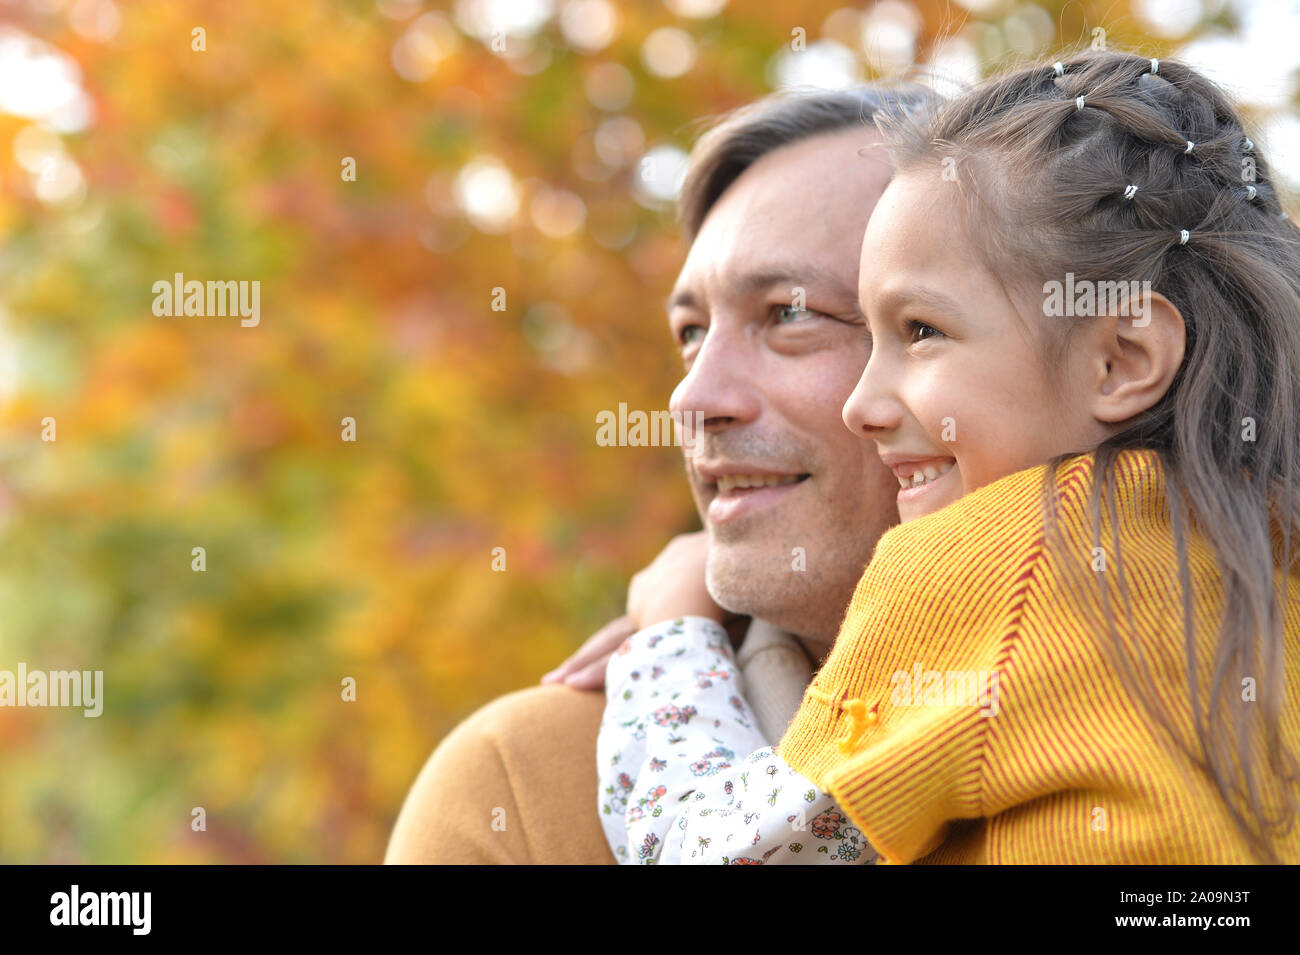 Portrait of a father and daughter having fun outdoors Stock Photo